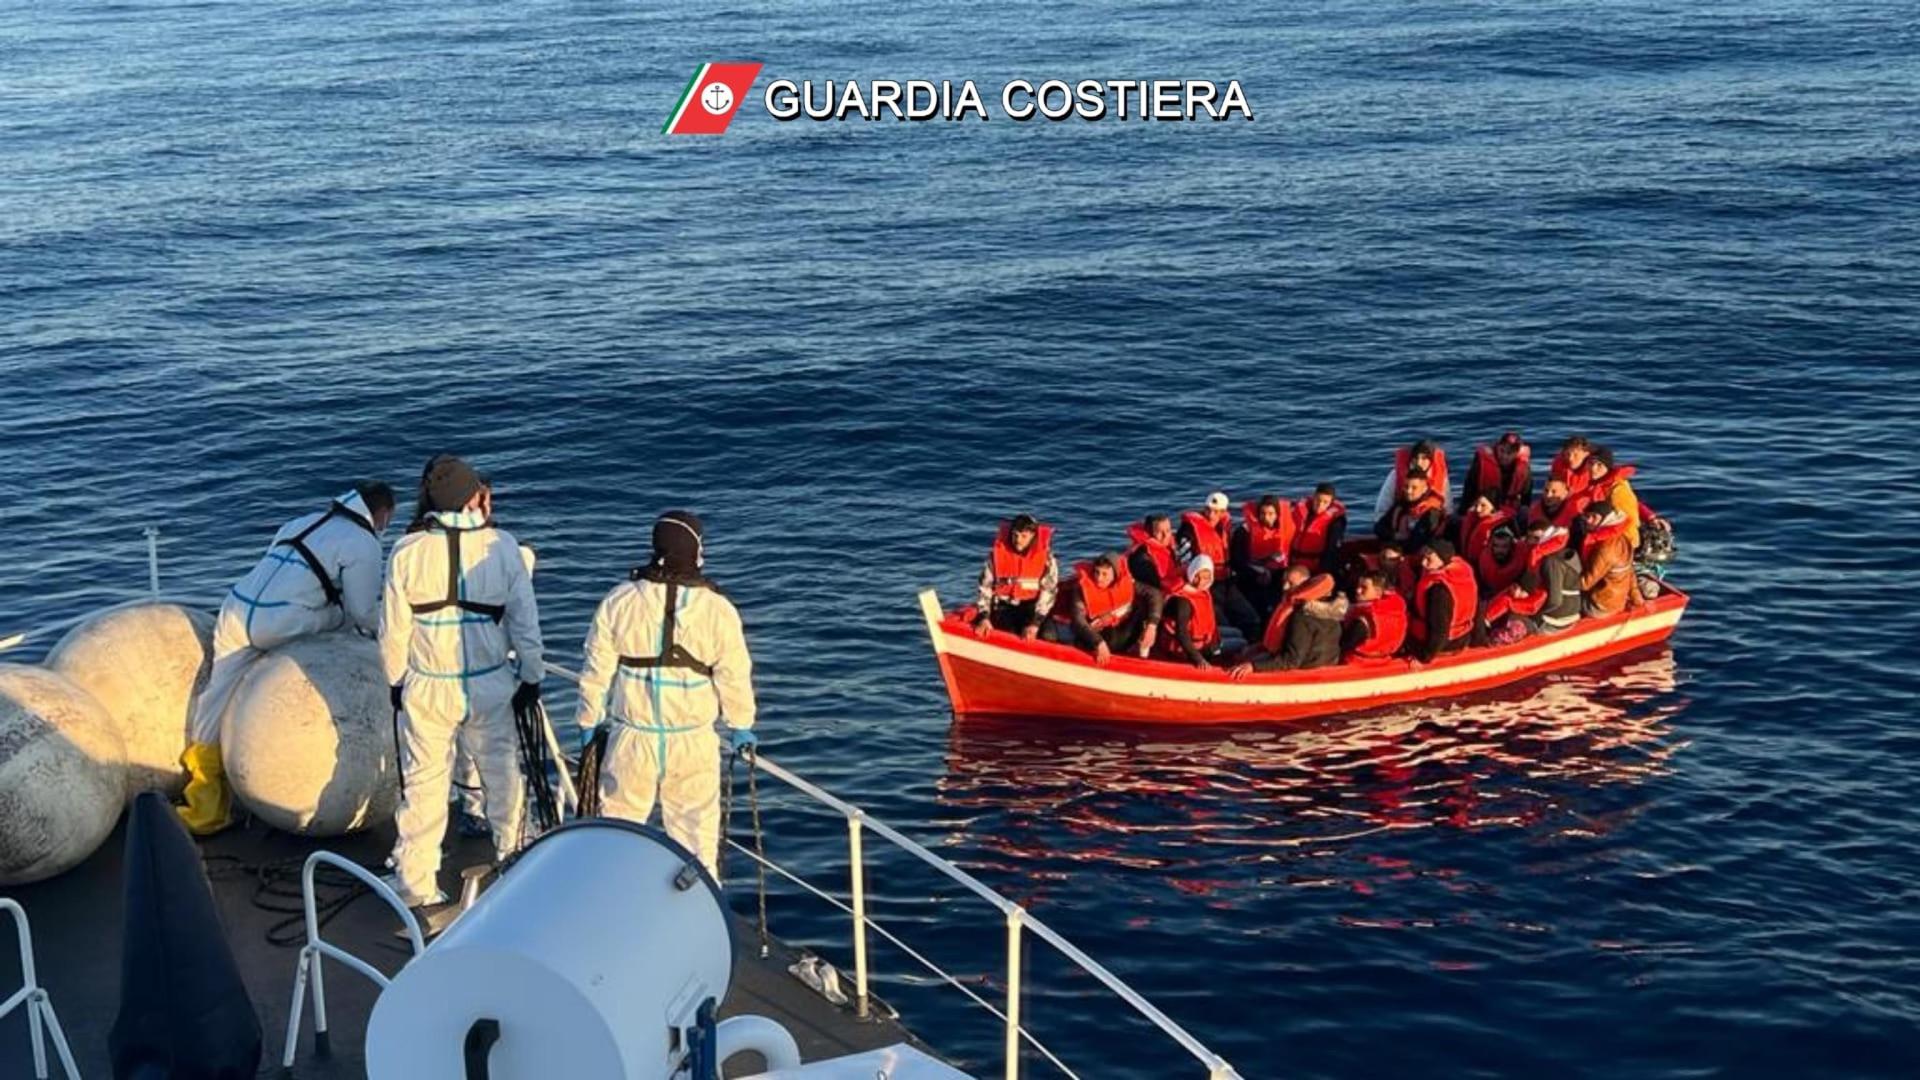 A handout photo made available by Italian Coast Guard (Guardia Costiera) shows Italian Coast Guard rescuing migrants in Ionian Sea of the Mediterranean, close to Sicily and Calabria, Italy, 10 April 2023. EFE/EPA/ITALIAN COAST GUARD